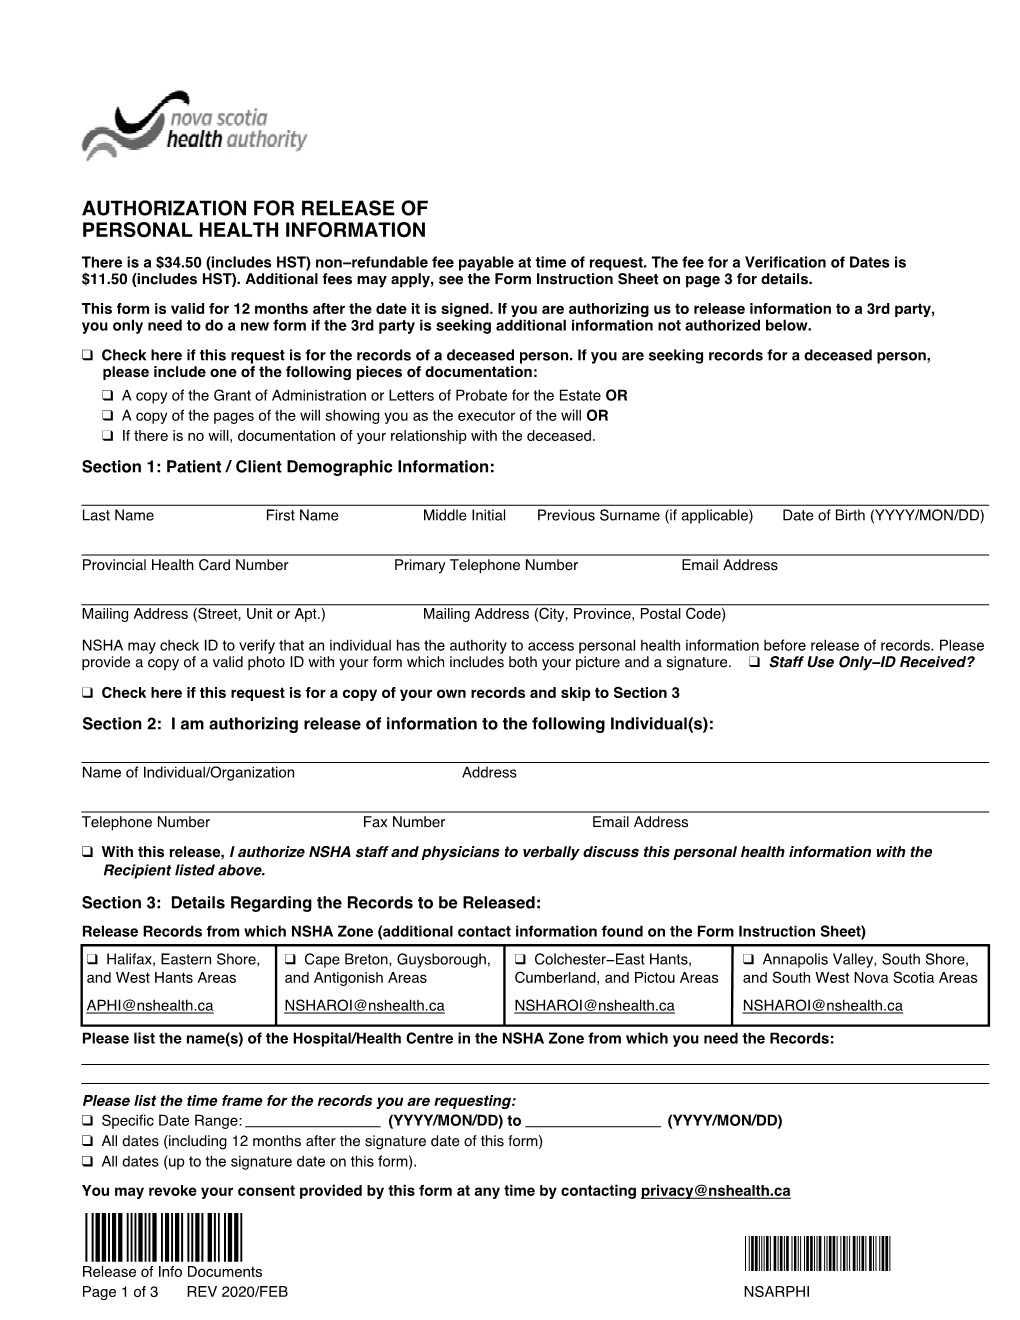 NSHA Authorization for Release of Personal Health Information.Pdf